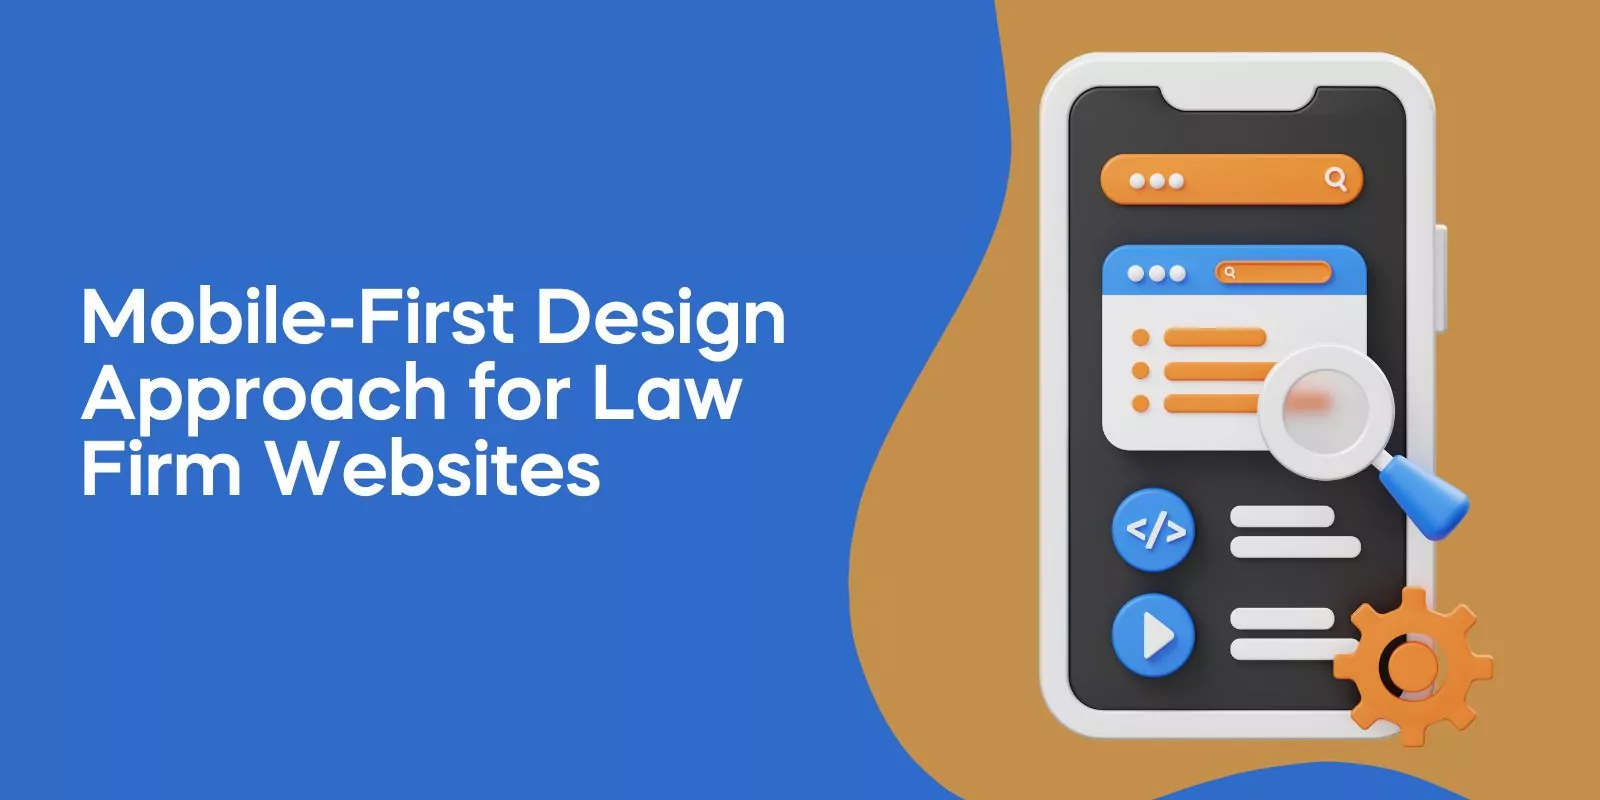 Mobile-First Design Approach for Law Firm Websites